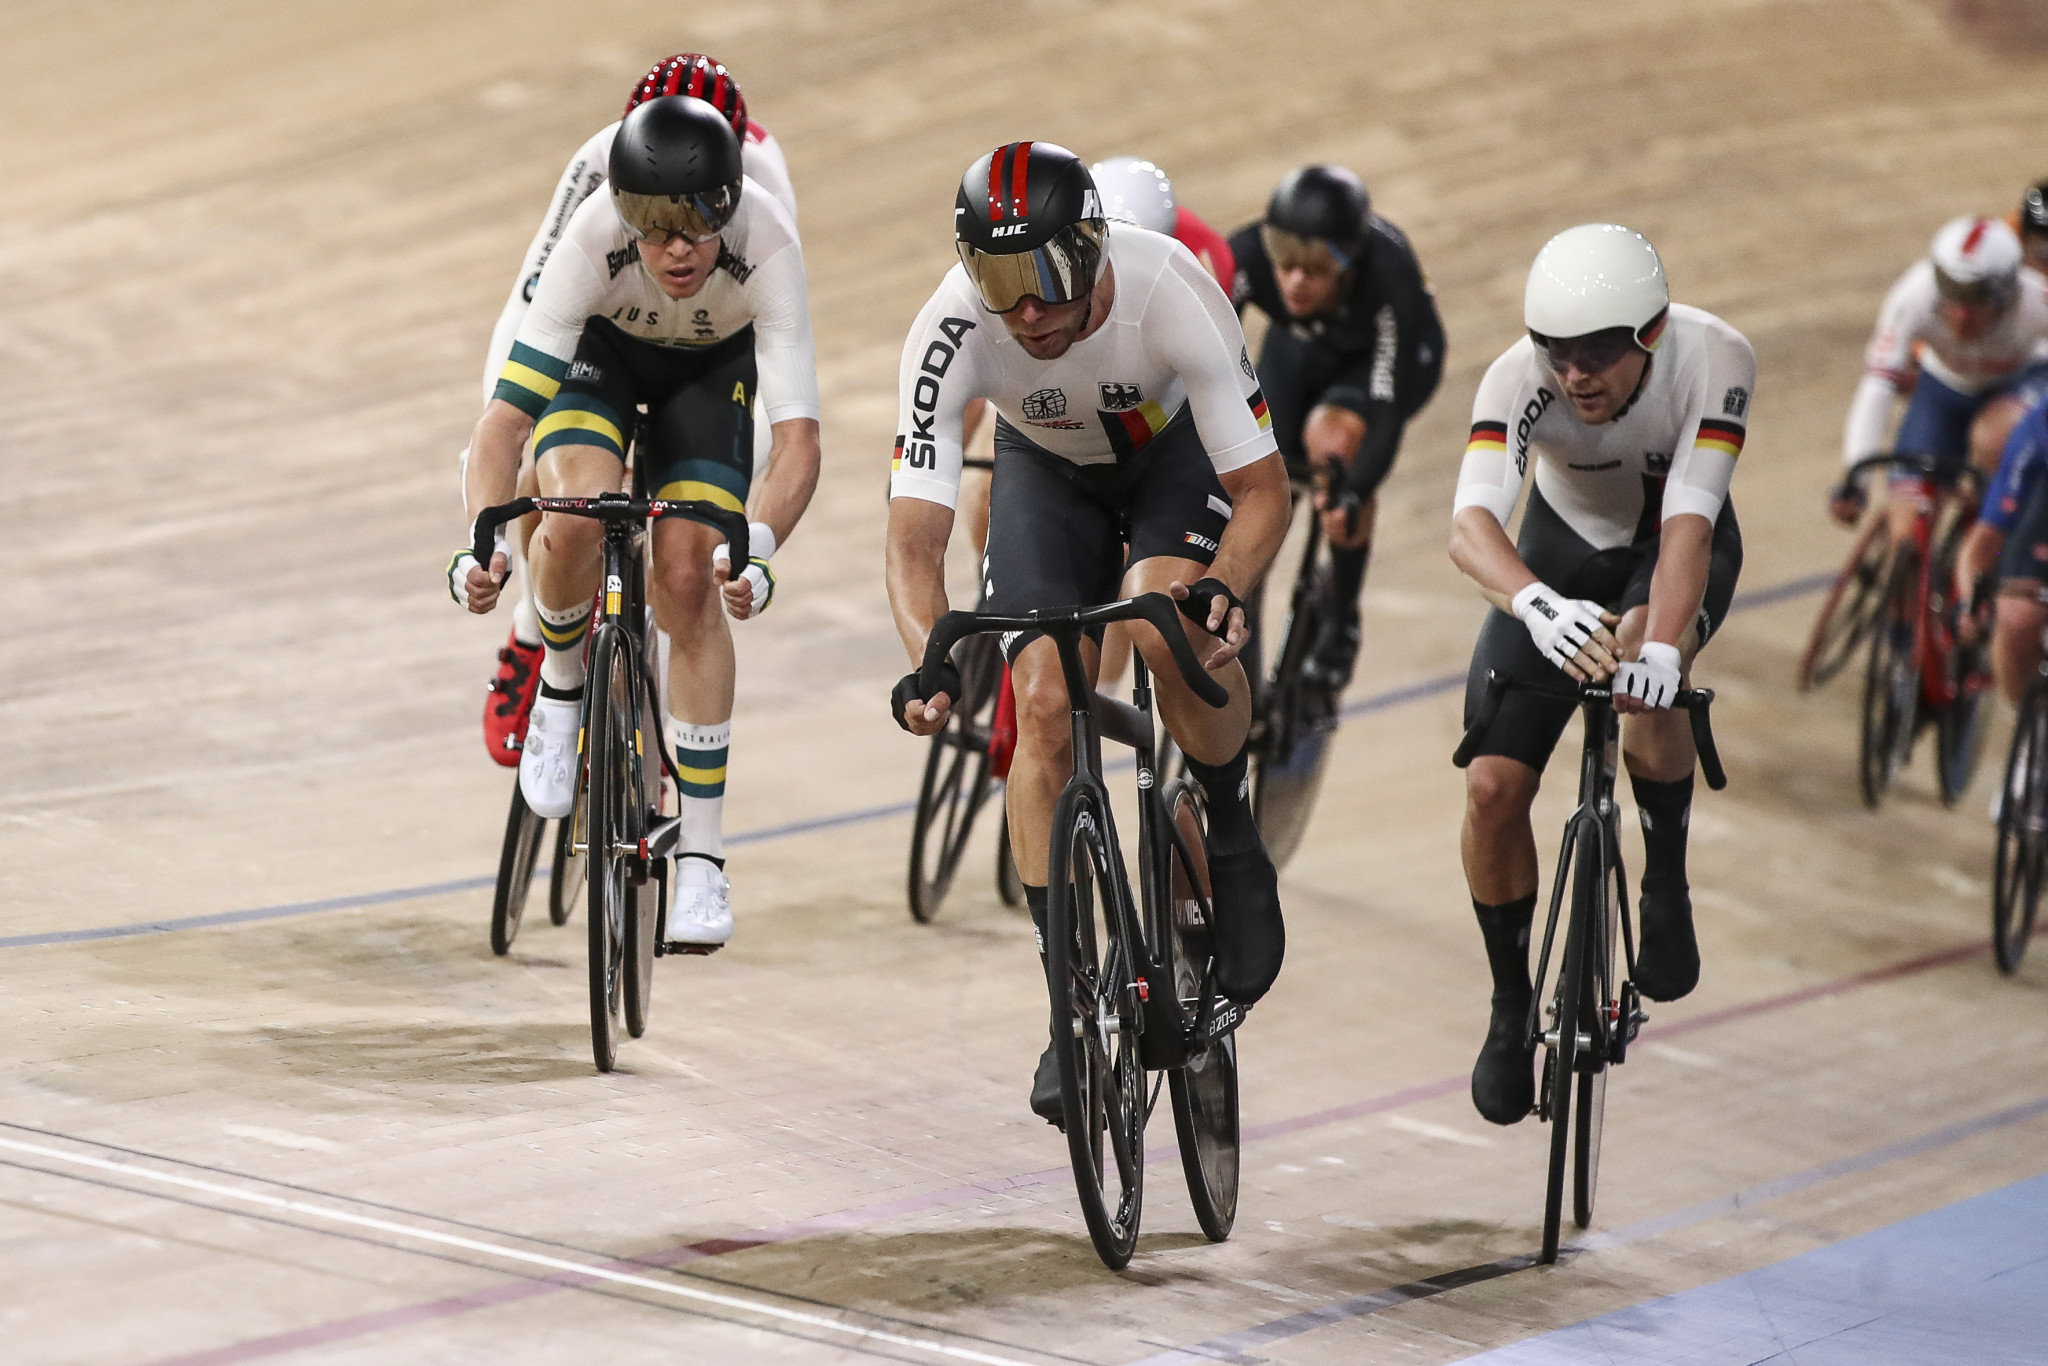 The partnership was announced during the UCI Track Cycling World Championships in Berlin ©Getty Images